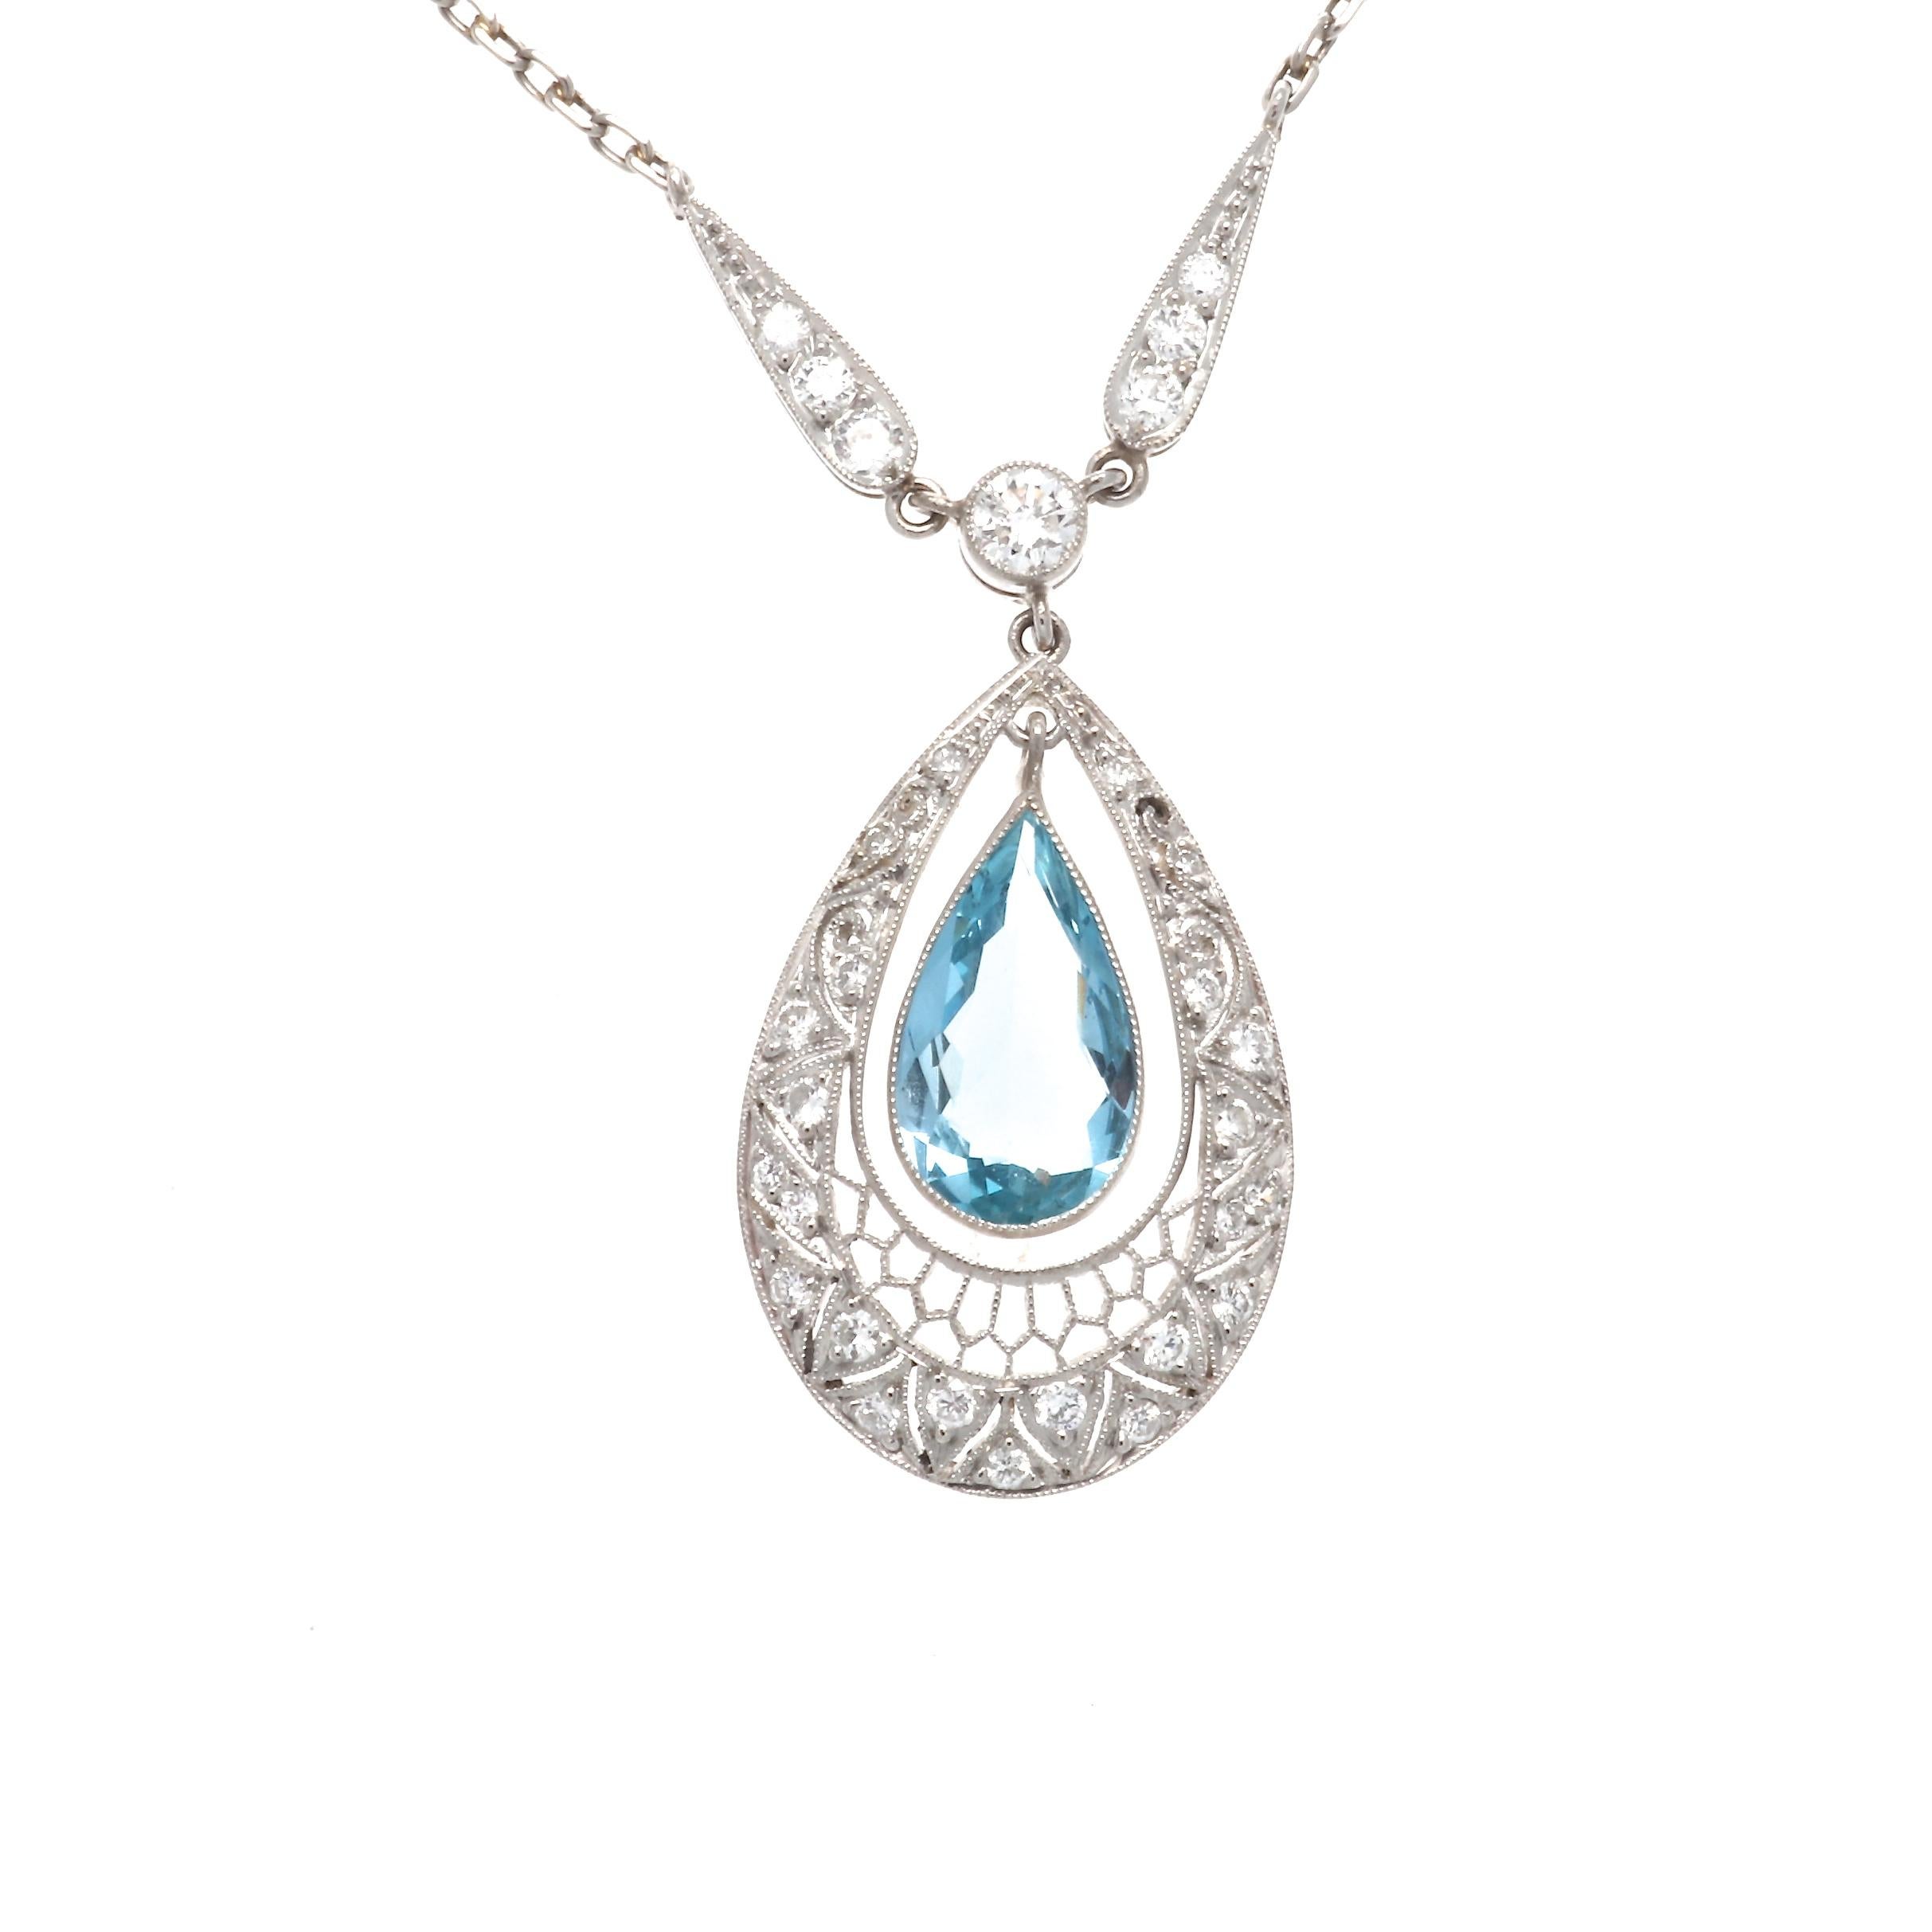 The jewel of the ocean in an Art Deco inspired necklace. Featuring a pendant designed with a glowing pear shaped aquamarine resting between diamonds and expertly crafted platinum. Hanging from a delicate platinum chain.